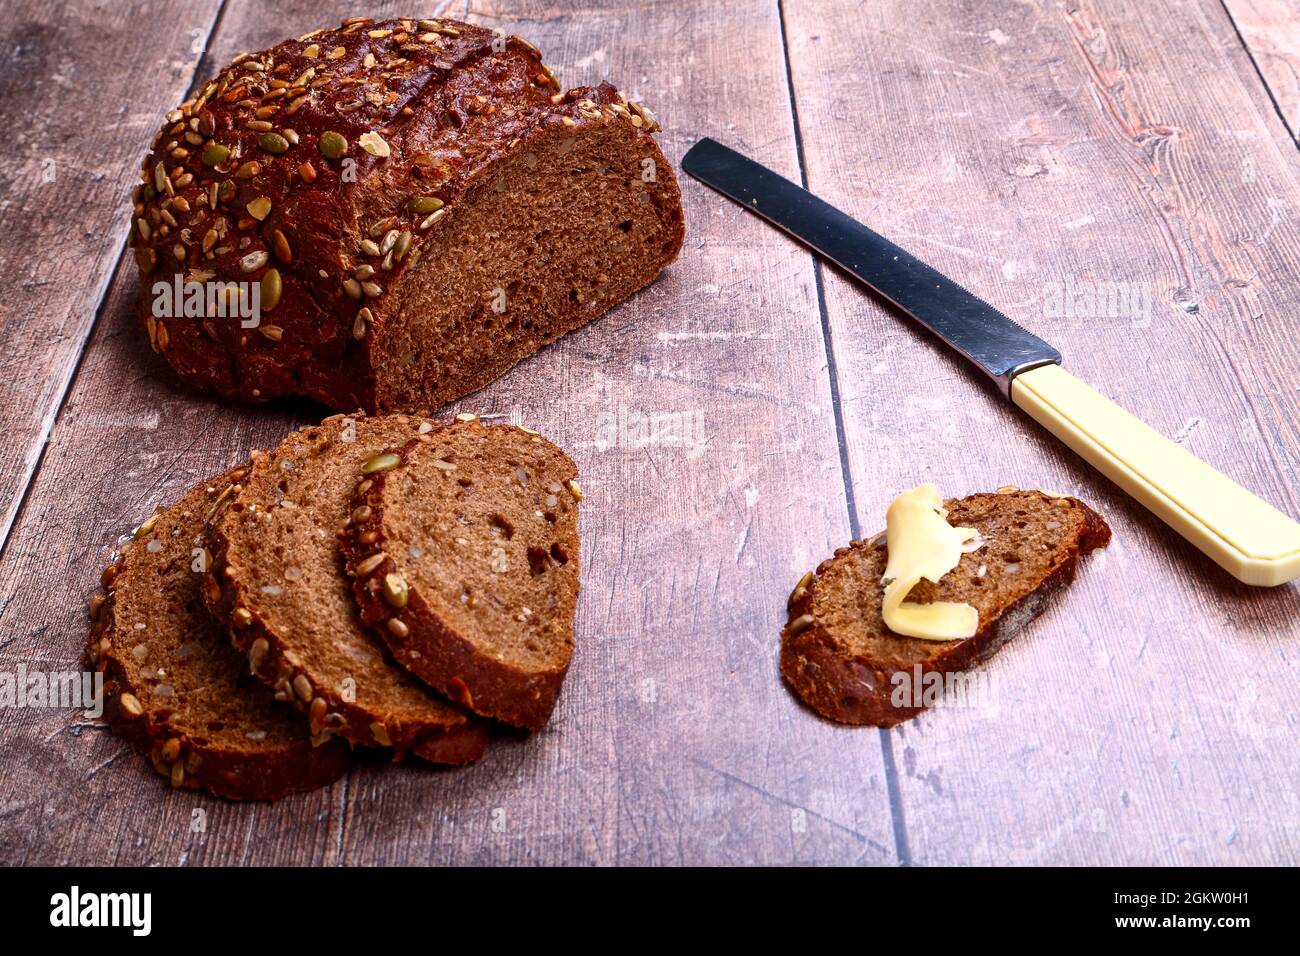 Freshly baked Pumpernickel Boule artisan bread with buttered bread slices cut and laid on a wooden table with a old bred knife Stock Photo